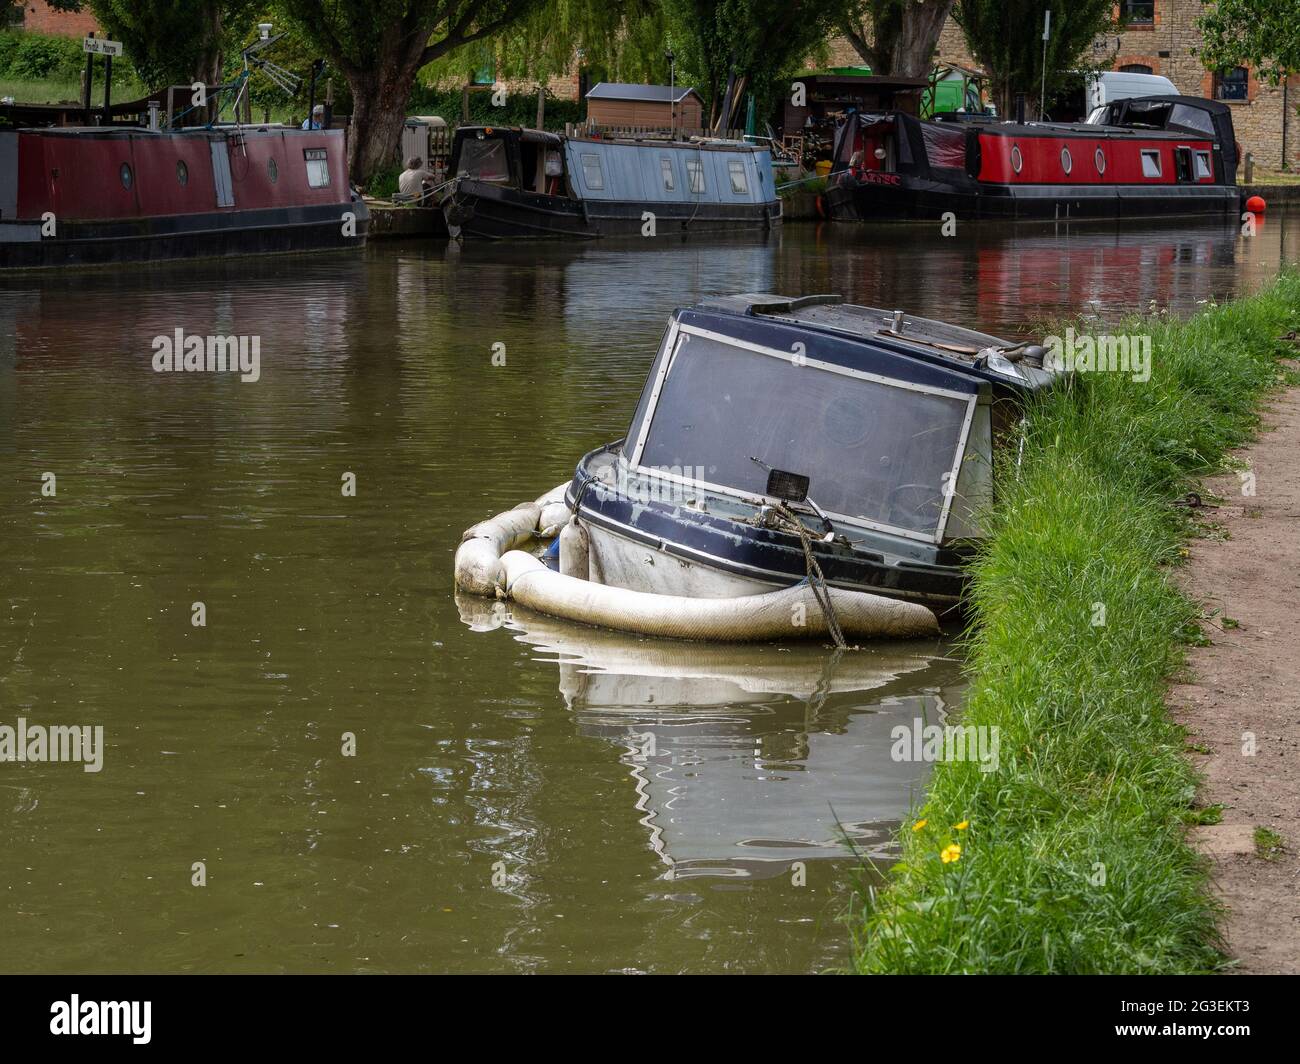 Semi derelict cabin cruiser kept afloat with a buoyancy aid, Grand Union canal, Cosgrove, Northamptonshire, UK Stock Photo